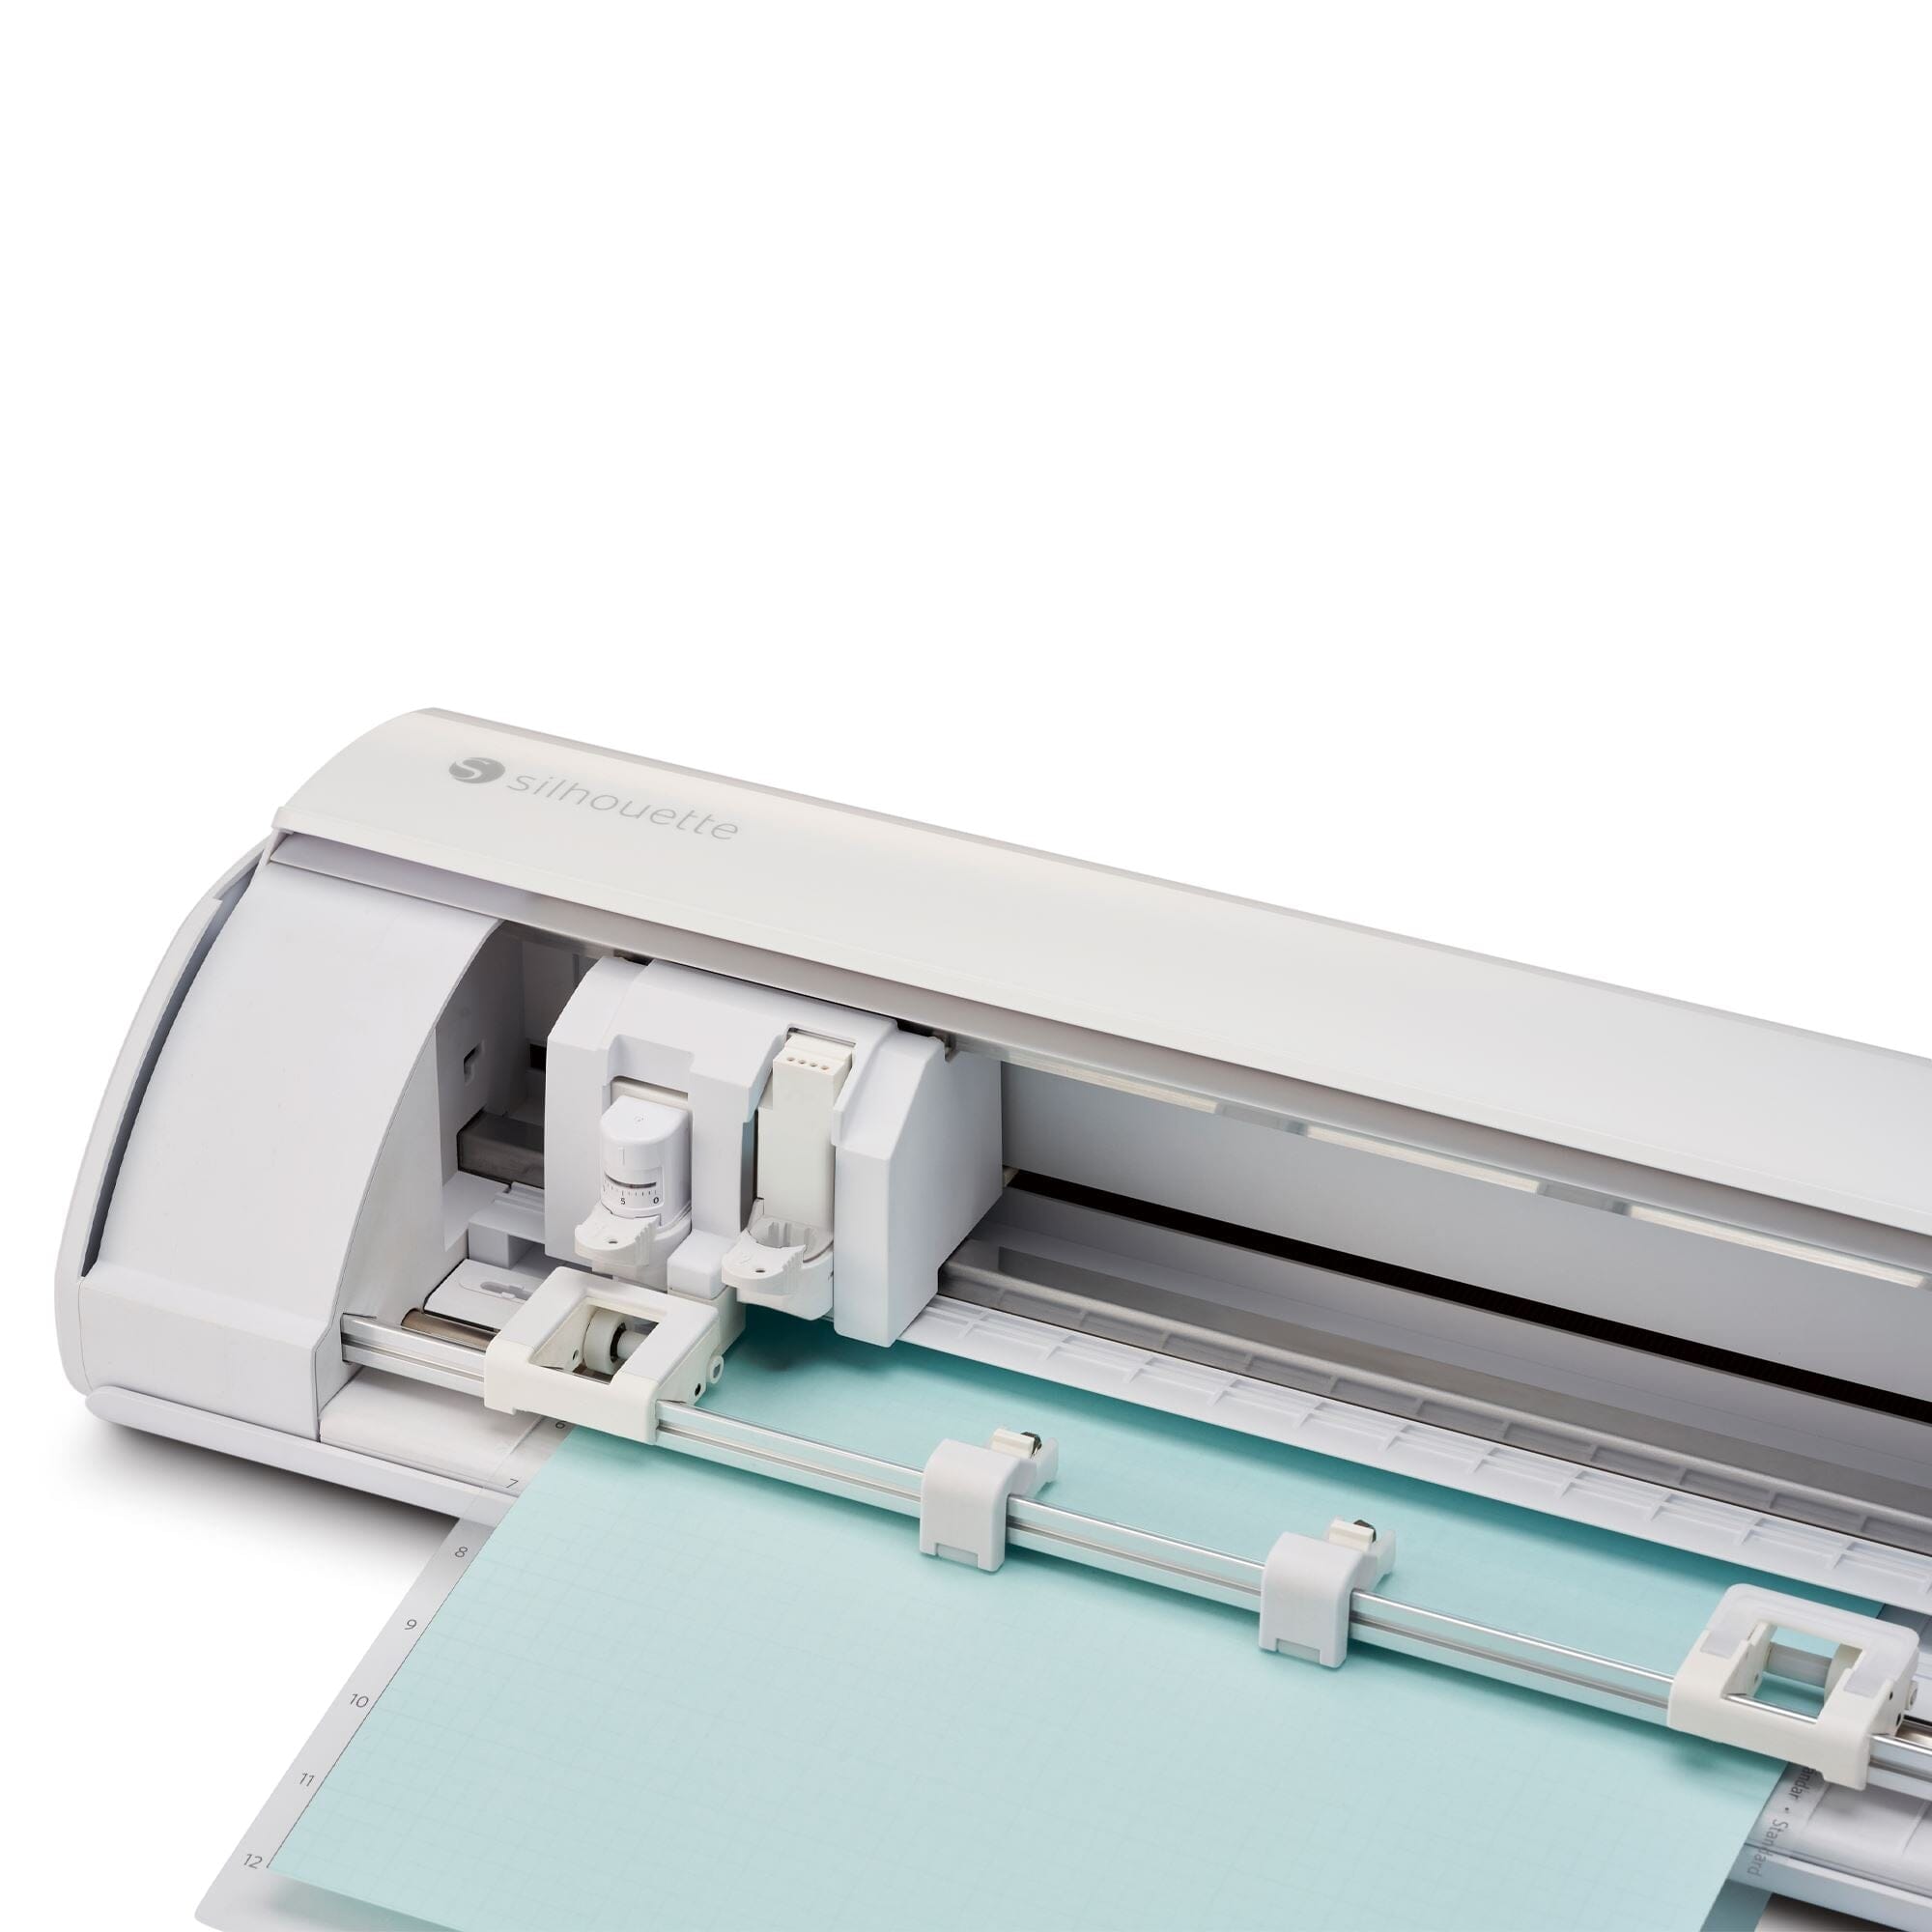 Silhouette Cameo 4 PRO - 24 w/ Oracal 651 24 Wide Vinyl Rolls, Tools,  Guides 